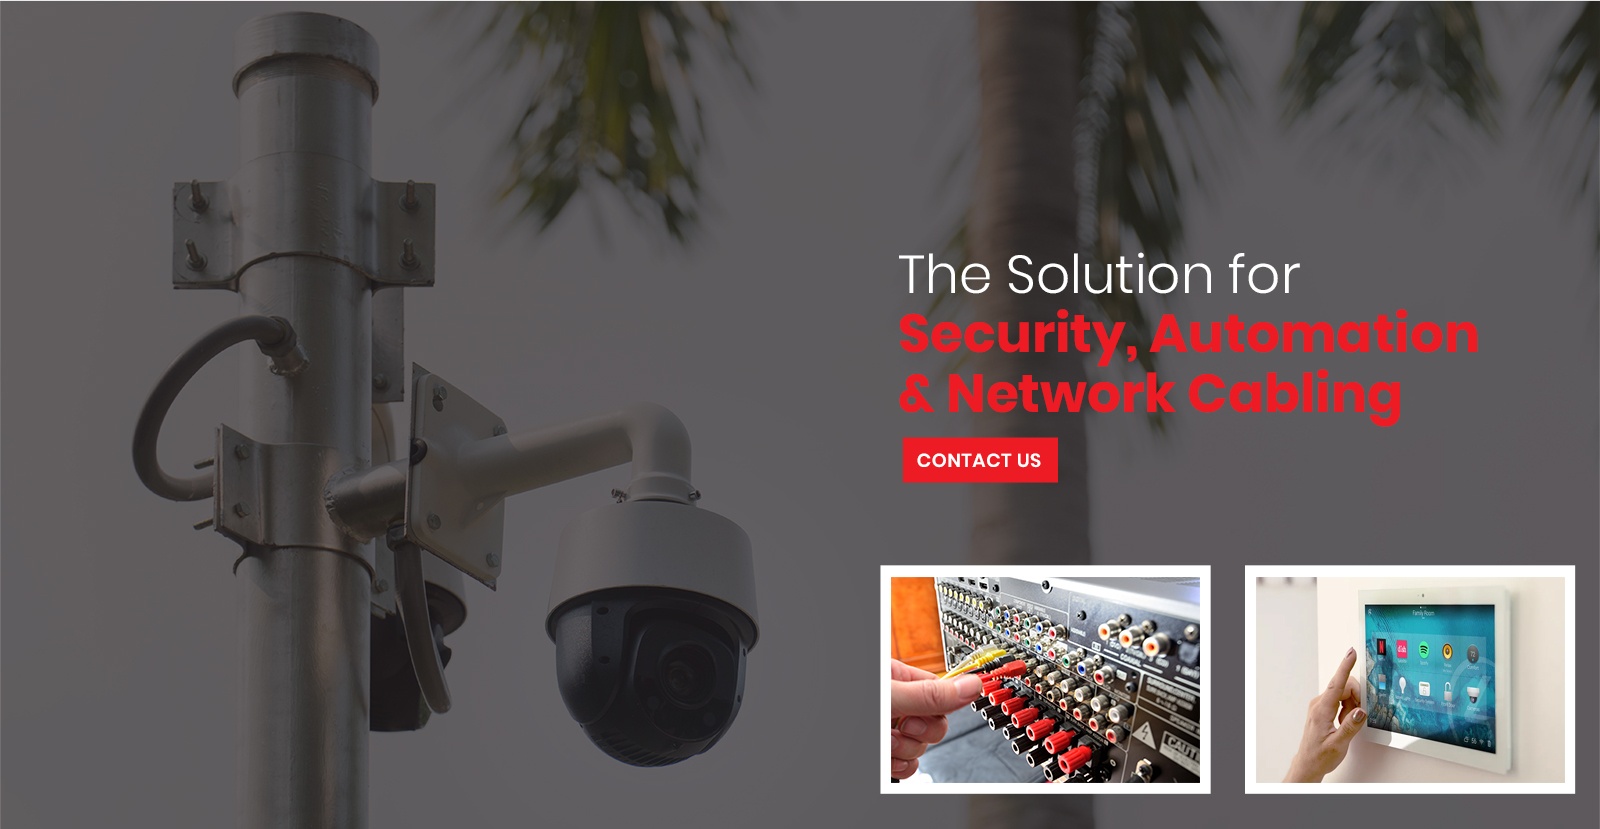 The Solution for Security, Automation, and Network Cabling in Hamilton